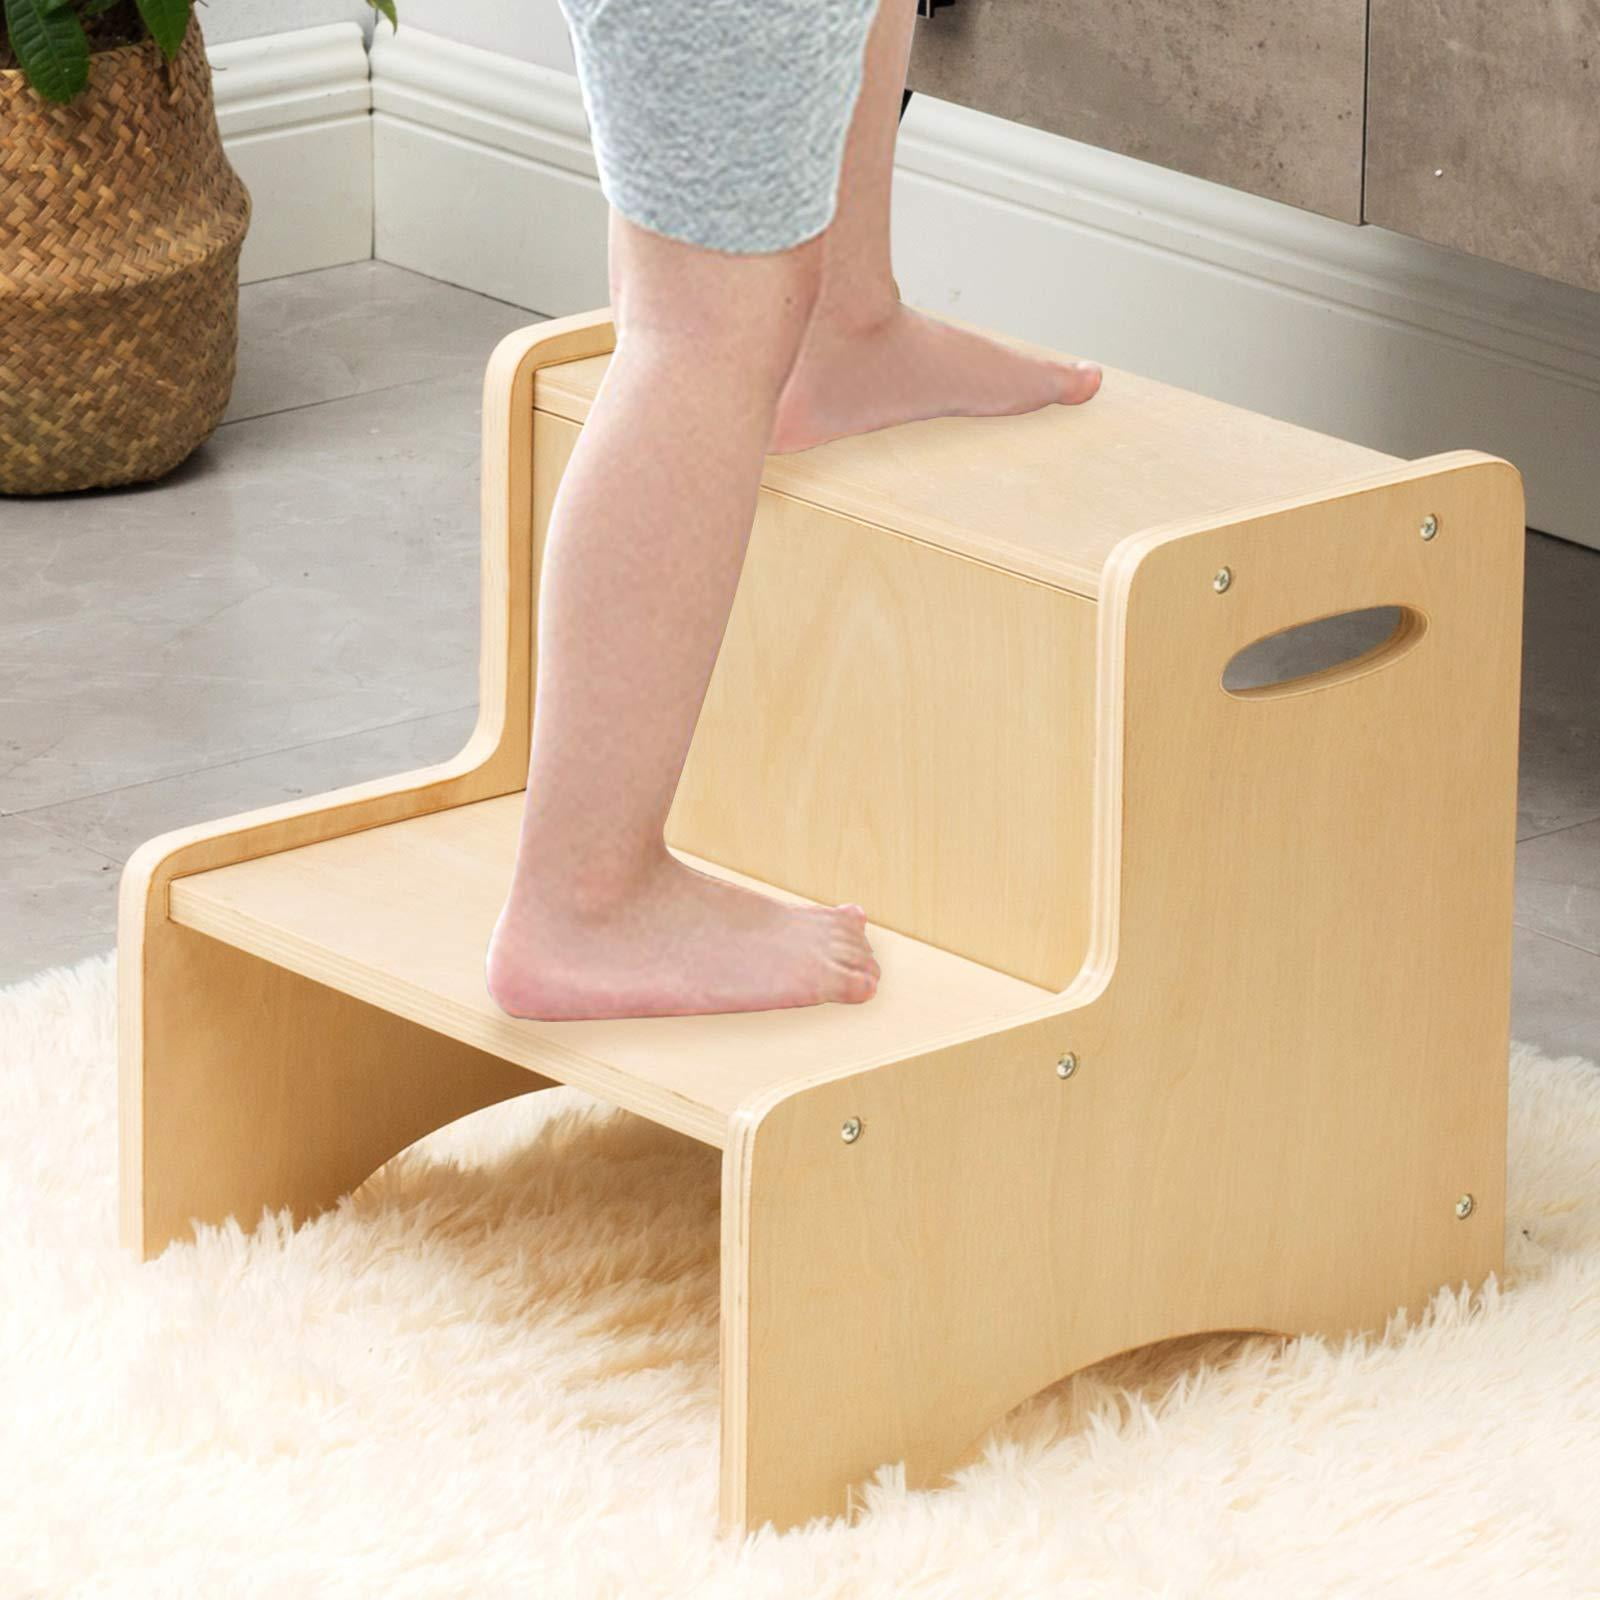 Wooden Step Stool,Two Step Stool for Kids,Supports 200 lbs Kids Toddler Stepping Stool Toilet/Kitchen/Bed Step Stool,Natural 